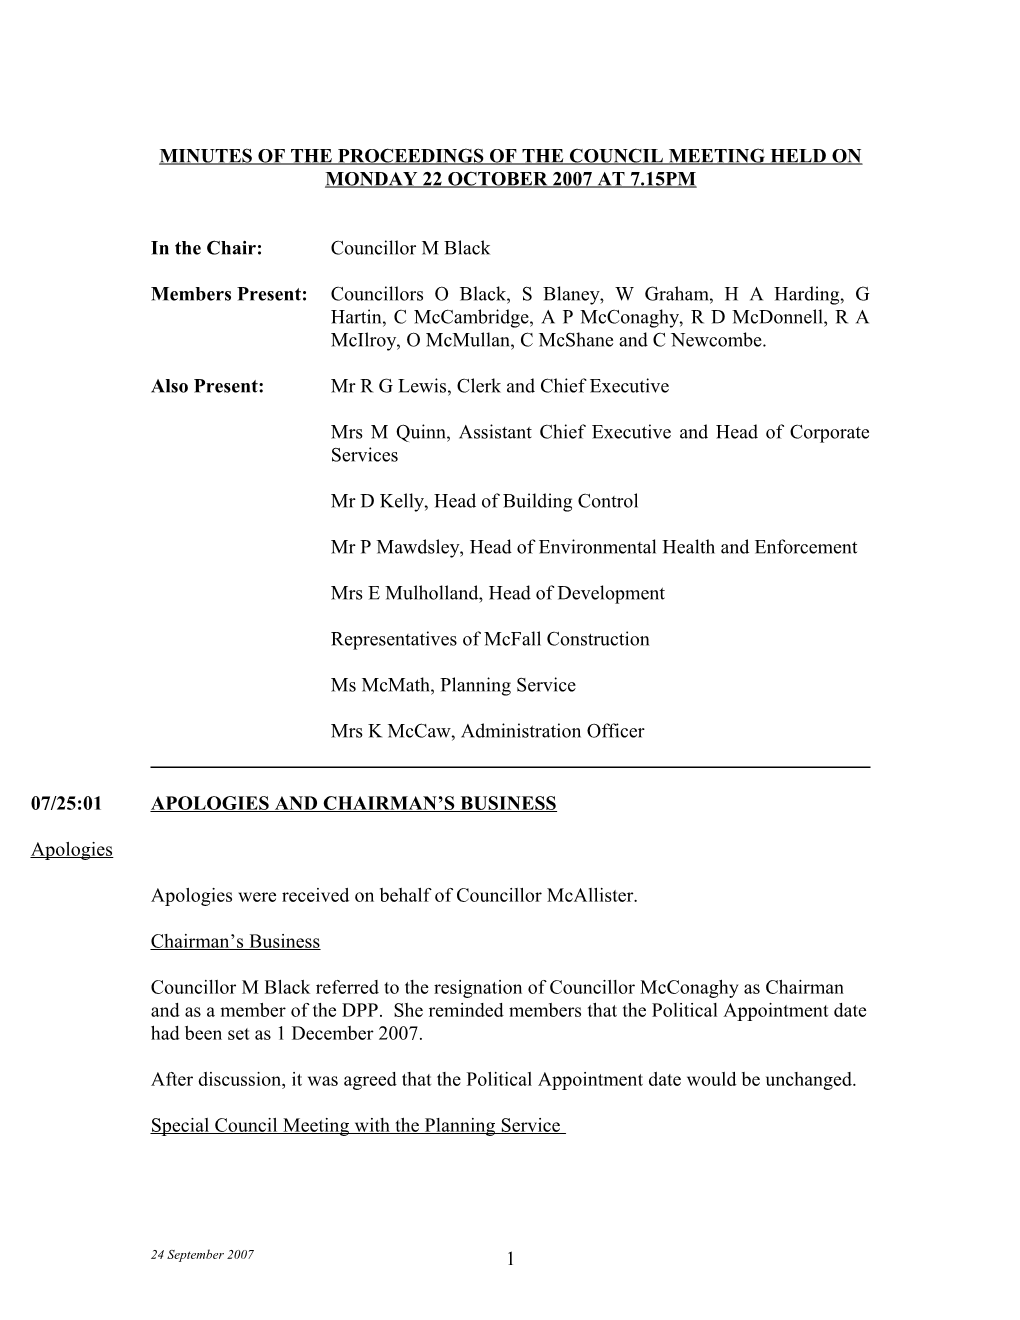 Minutes of the Proceedings of the Council Meeting Held on Monday 24 September 2007 at 7